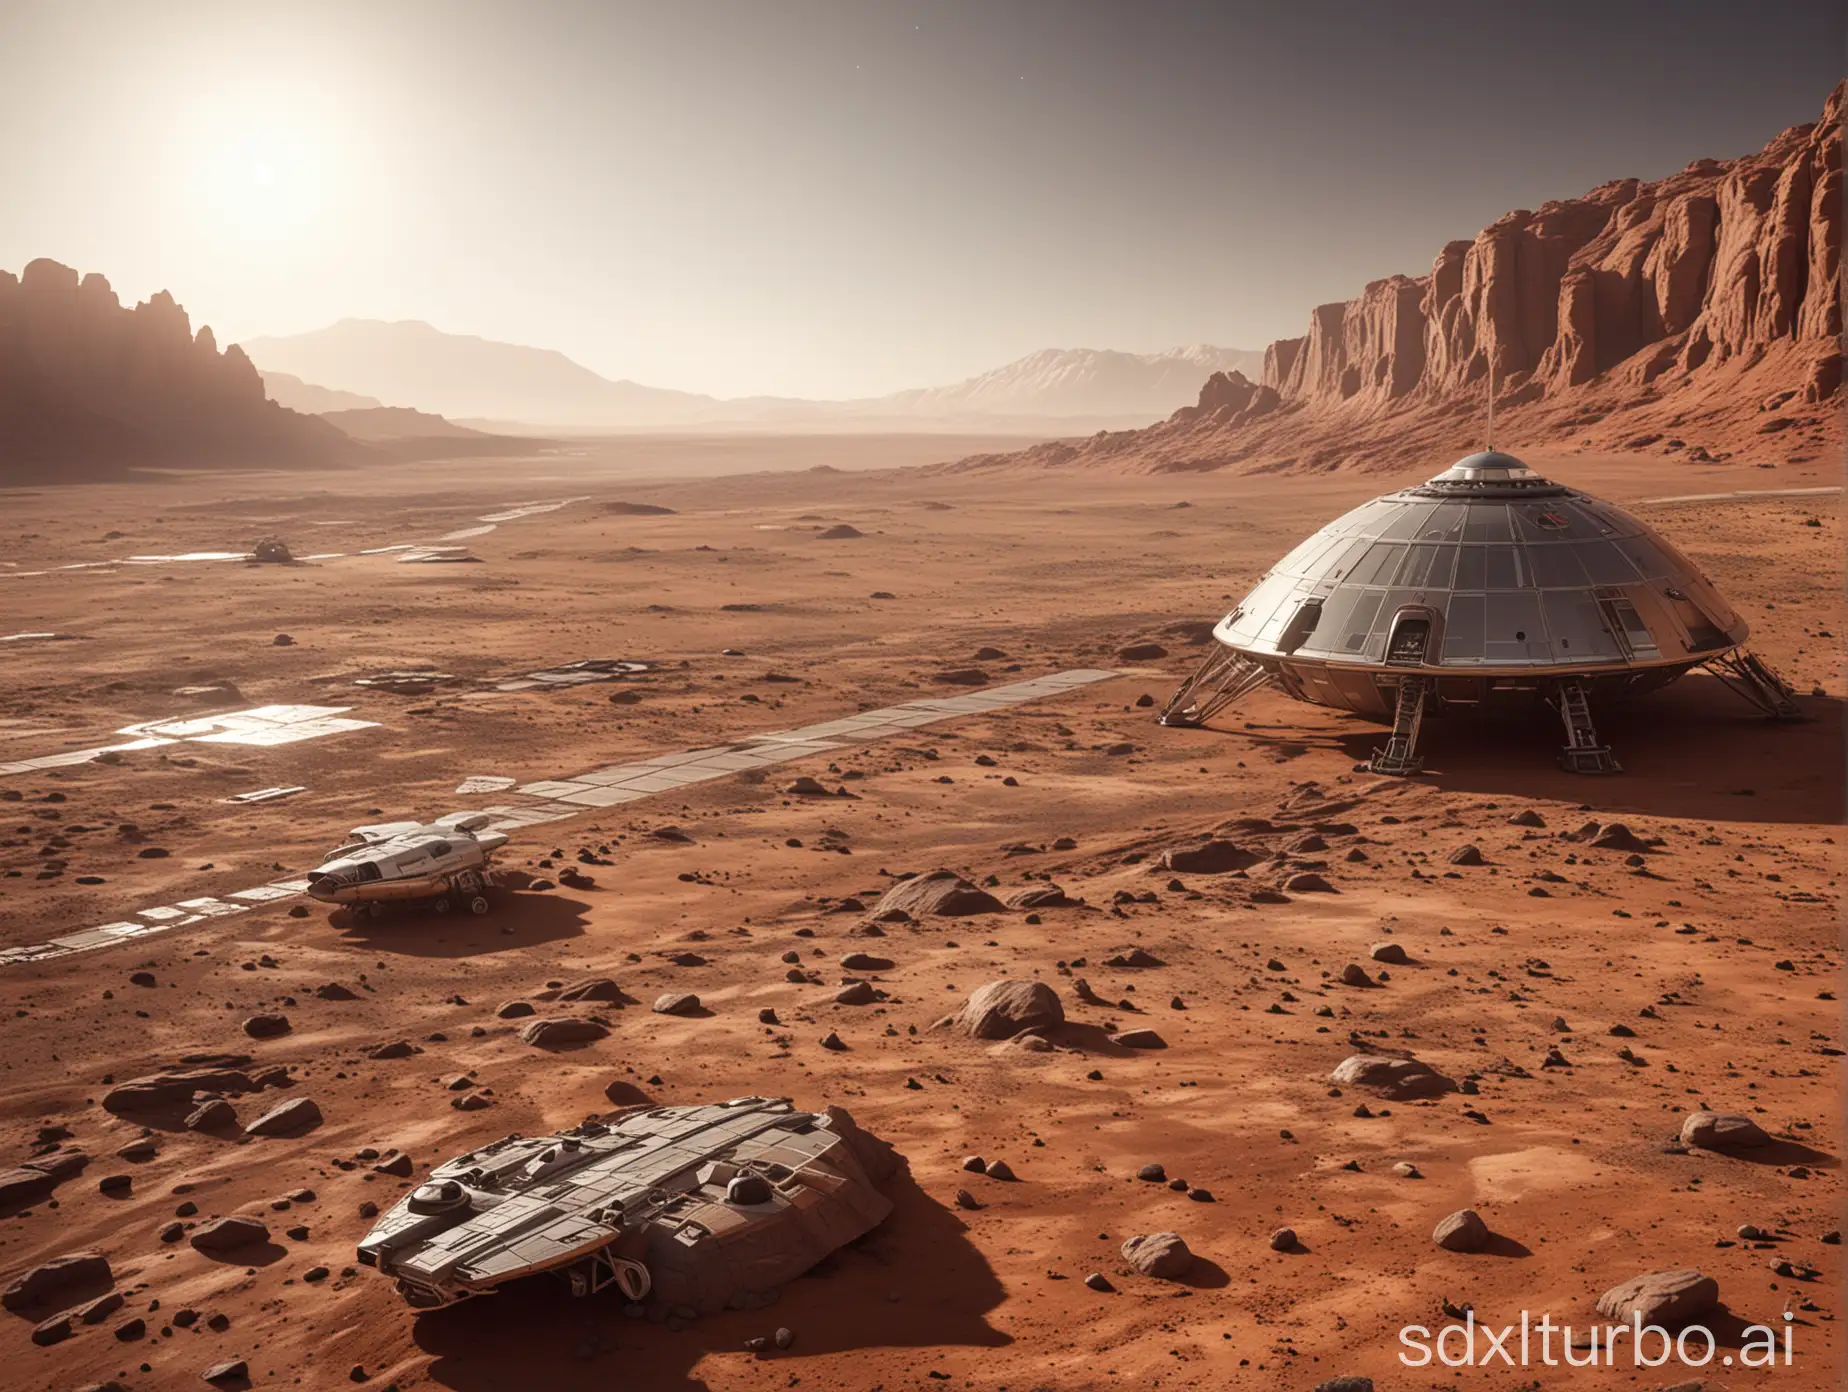 straight angle view, distant view, Martian appearance, sky with spaceship, ground with large glass building base, side oblique lighting, science fiction style